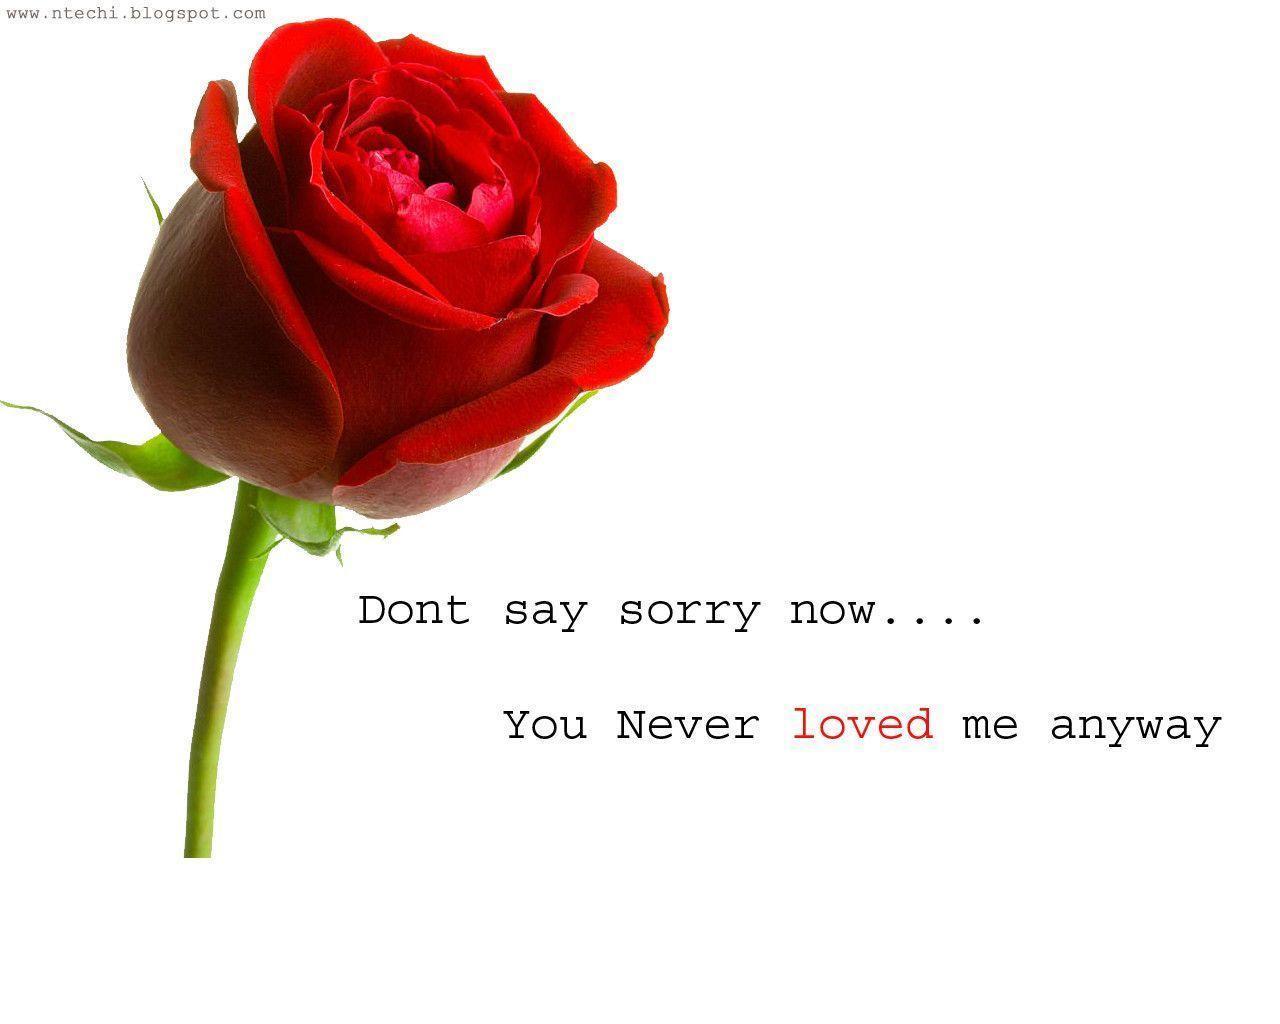 Newmagazine: Dont say sorry now, you never loved me anyway